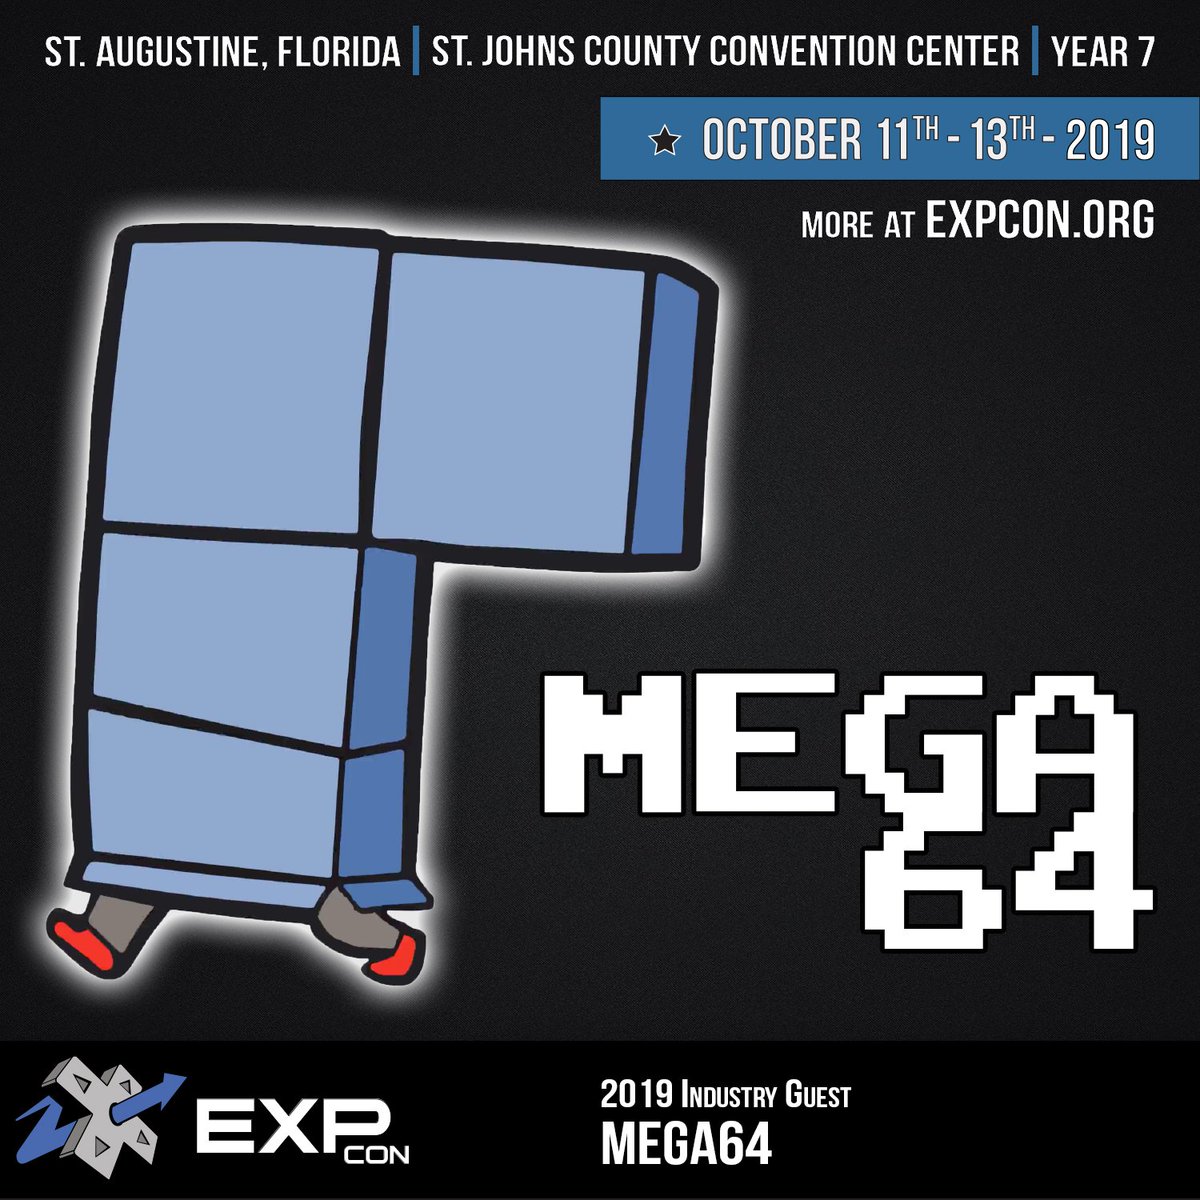 eXp Realty - Back by popular demand: The eXp EXPO Hall! Come meet  exhibitors, including ONE eXp, eXp Partners, and more! Start planning your  EXPCON eXperienceRegister at https://expcon.exprealty.com/#EXPCON2021 -  Facebook